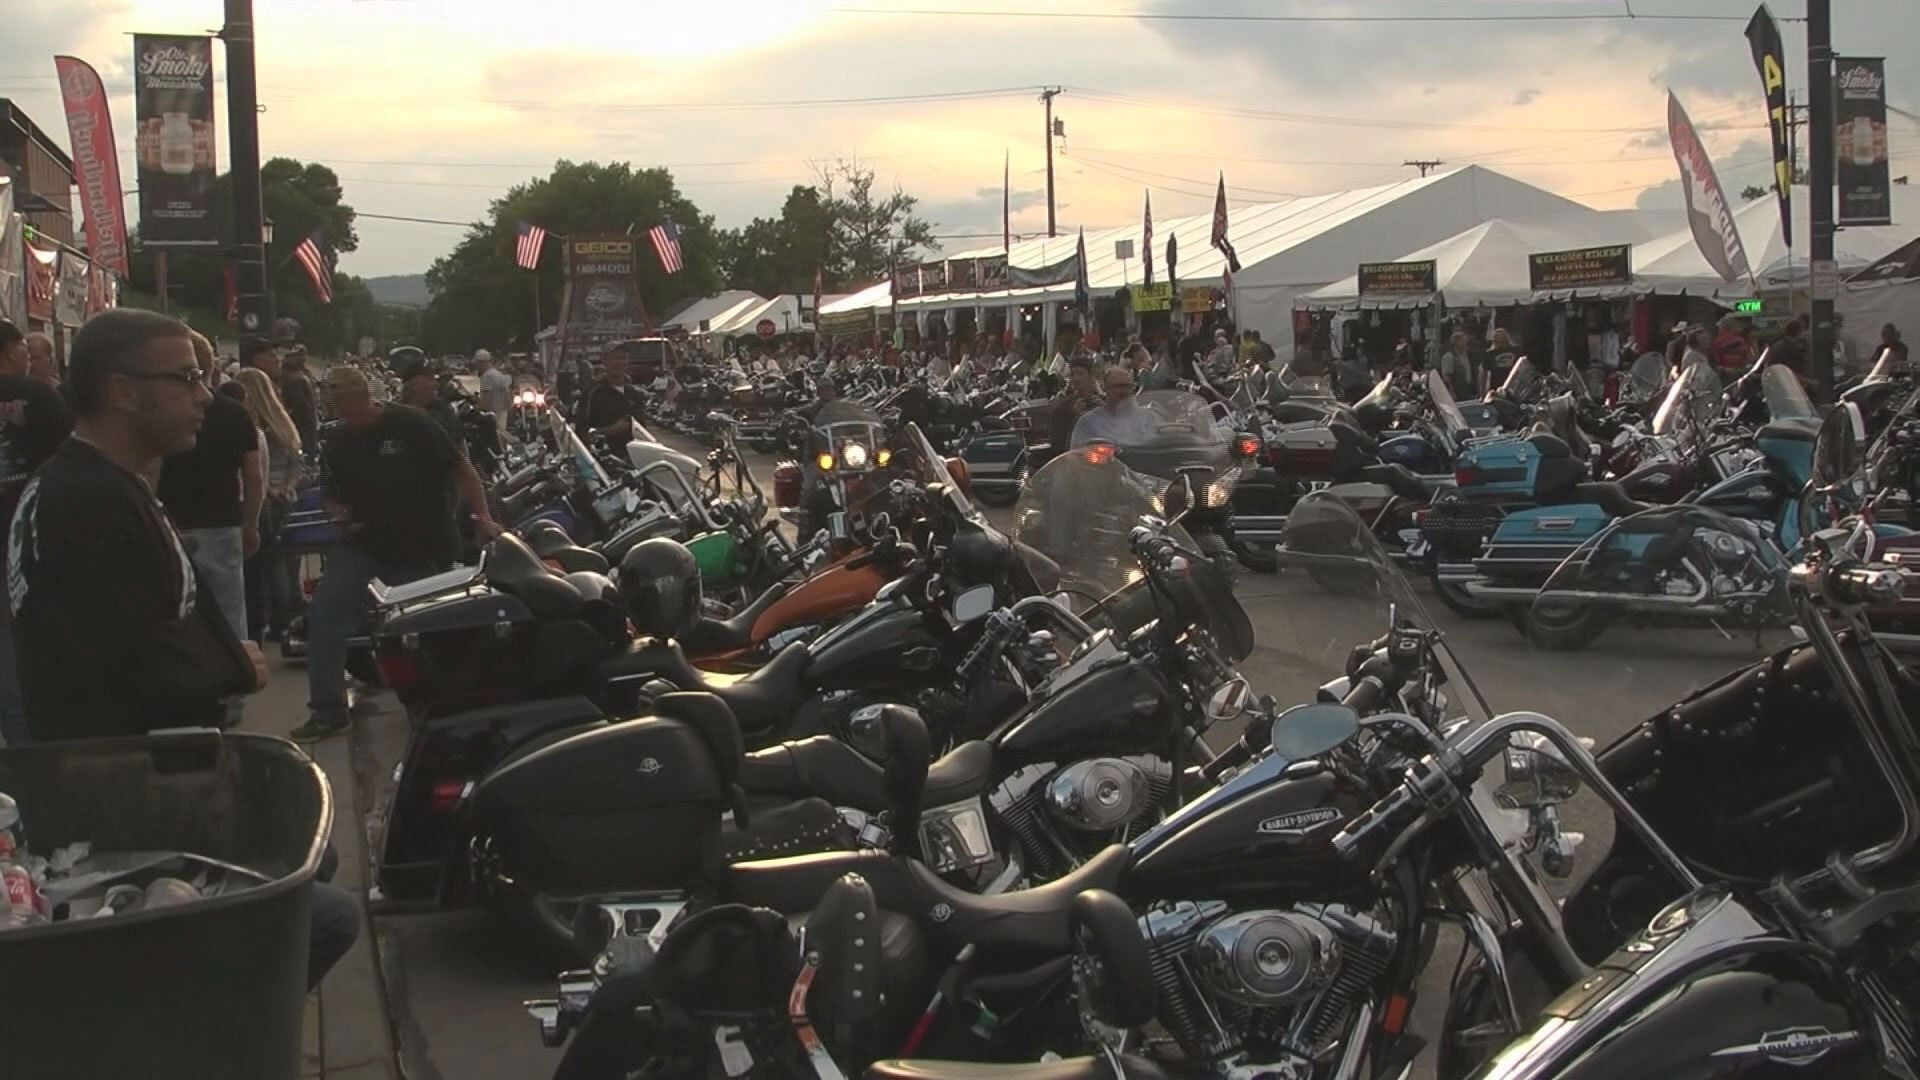 Motorcycle Rally will have “significant changes” according to the City of Sturgis